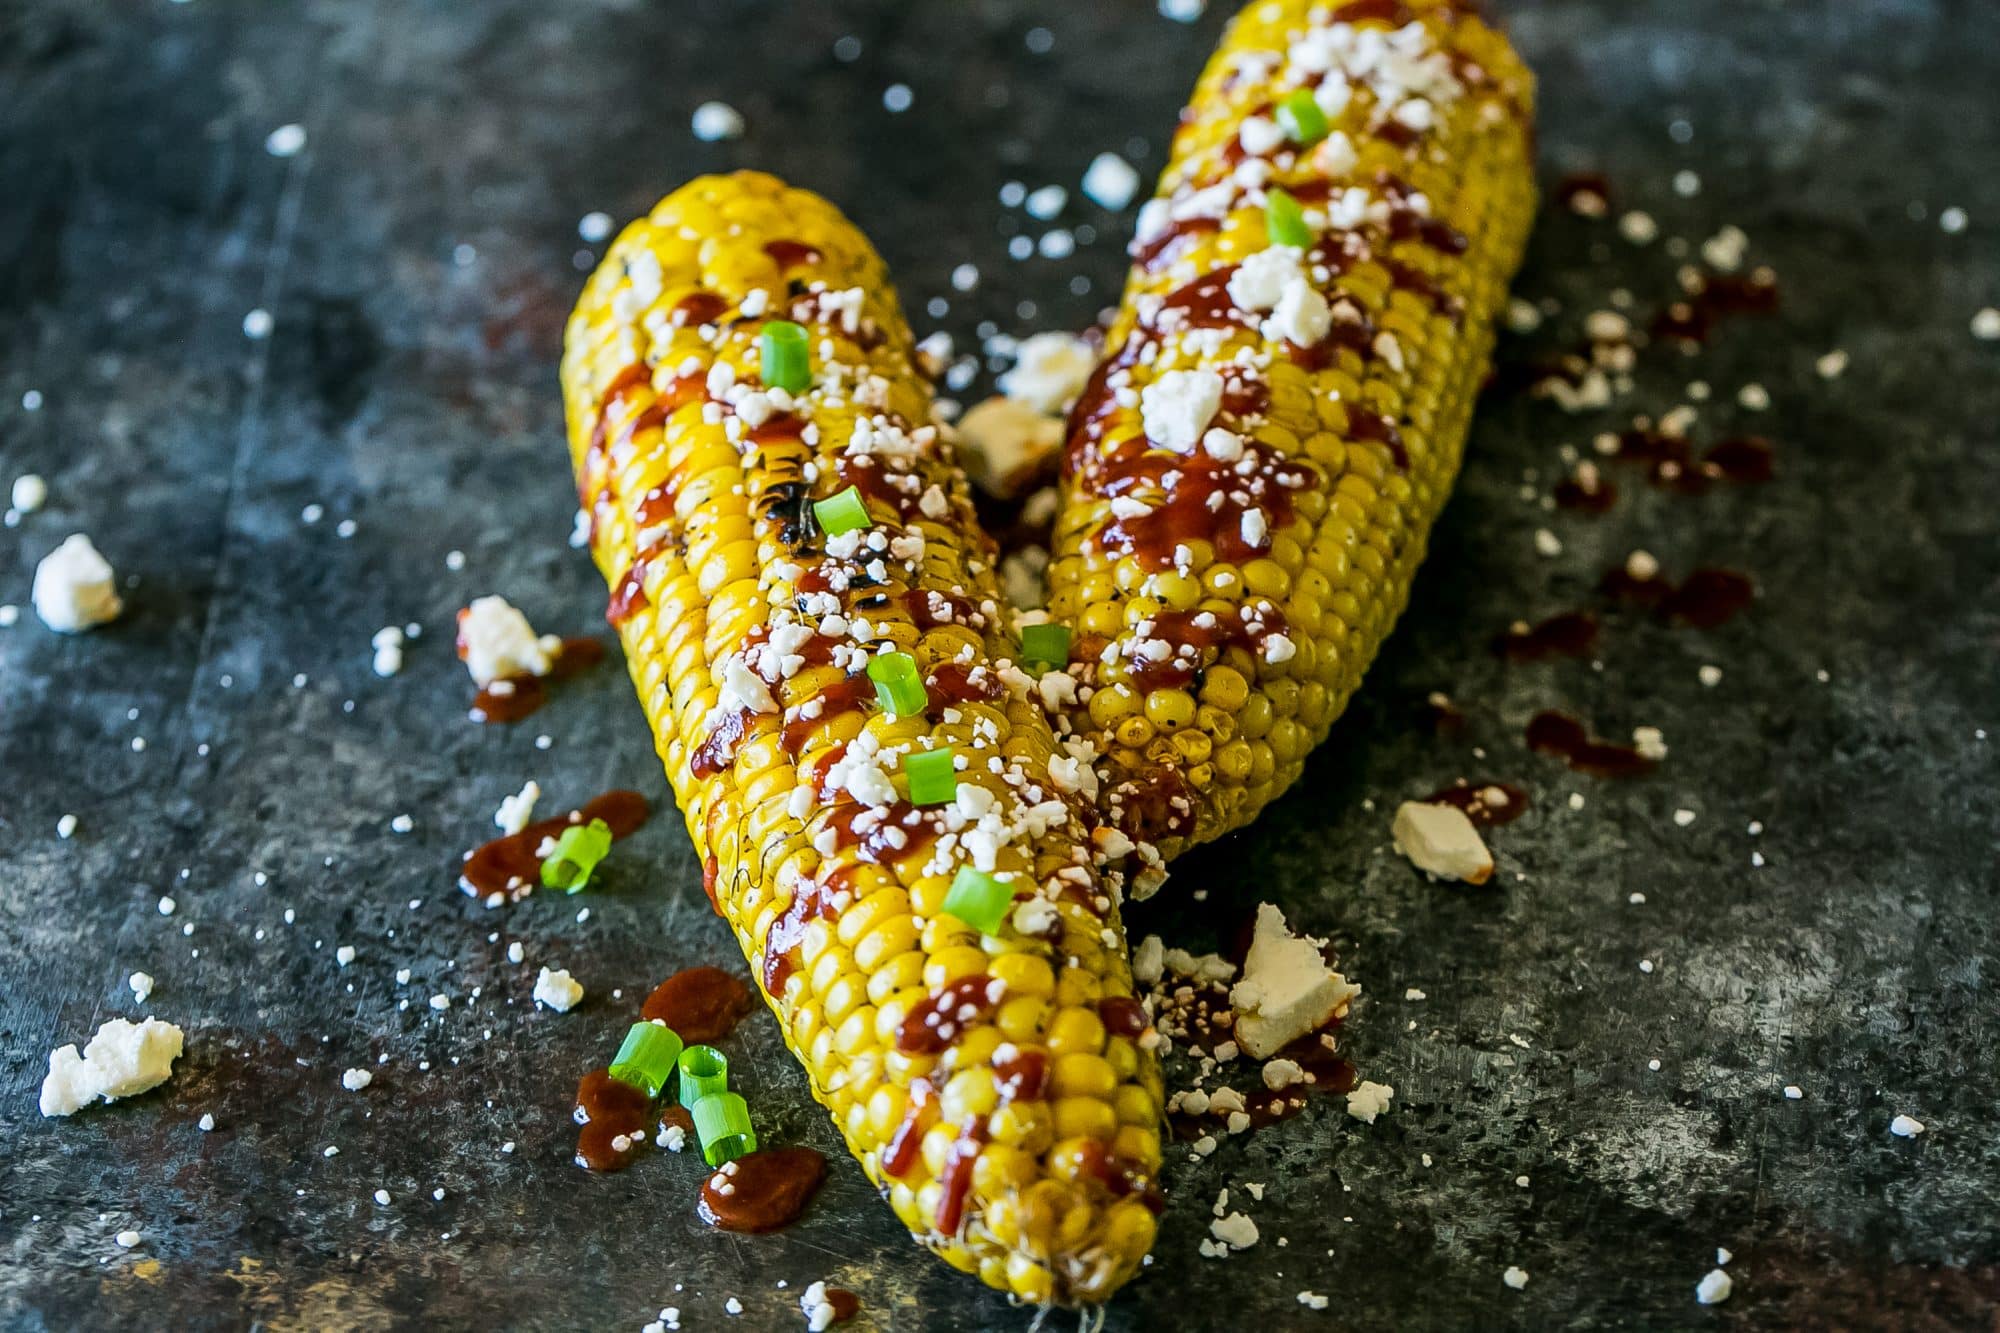 grilled corn smothered with sauce, cheese, and green onions